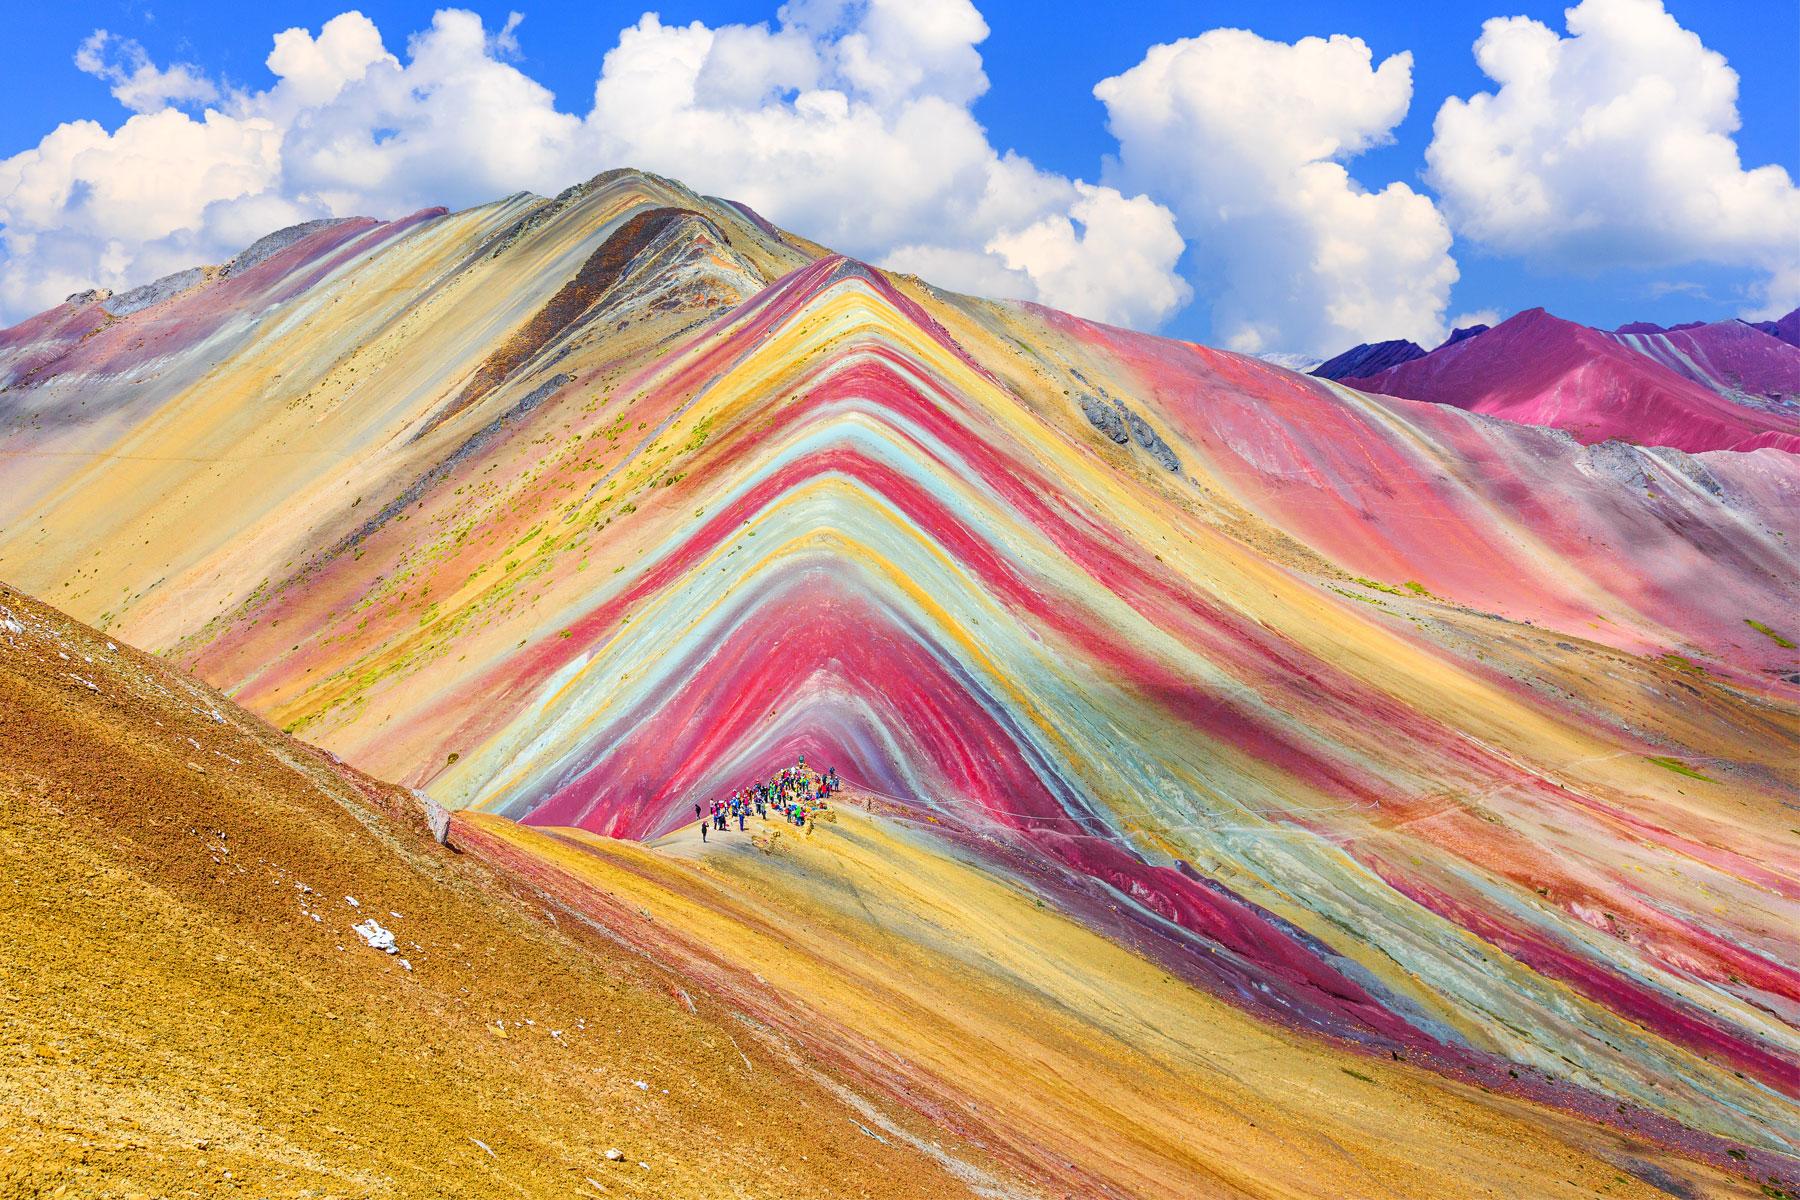 The World's 30 Most Colorful Natural Attractions – Travel Guide